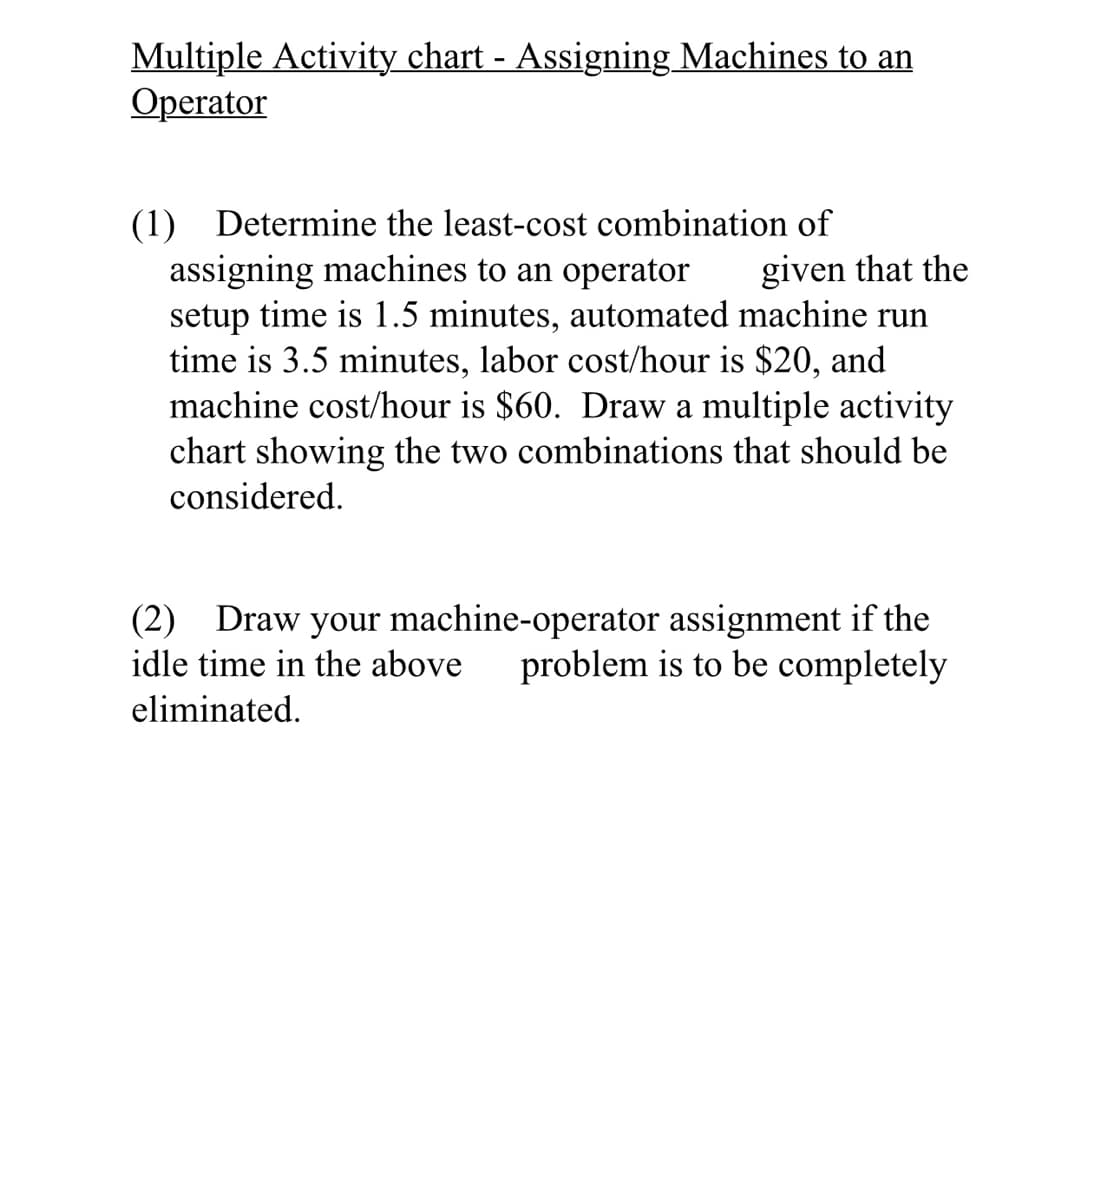 Multiple Activity chart - Assigning Machines to an
Operator
(1) Determine the least-cost combination of
assigning machines to an operator
given that the
setup time is 1.5 minutes, automated machine run
time is 3.5 minutes, labor cost/hour is $20, and
machine cost/hour is $60. Draw a multiple activity
chart showing the two combinations that should be
considered.
(2) Draw your machine-operator assignment if the
idle time in the above problem is to be completely
eliminated.